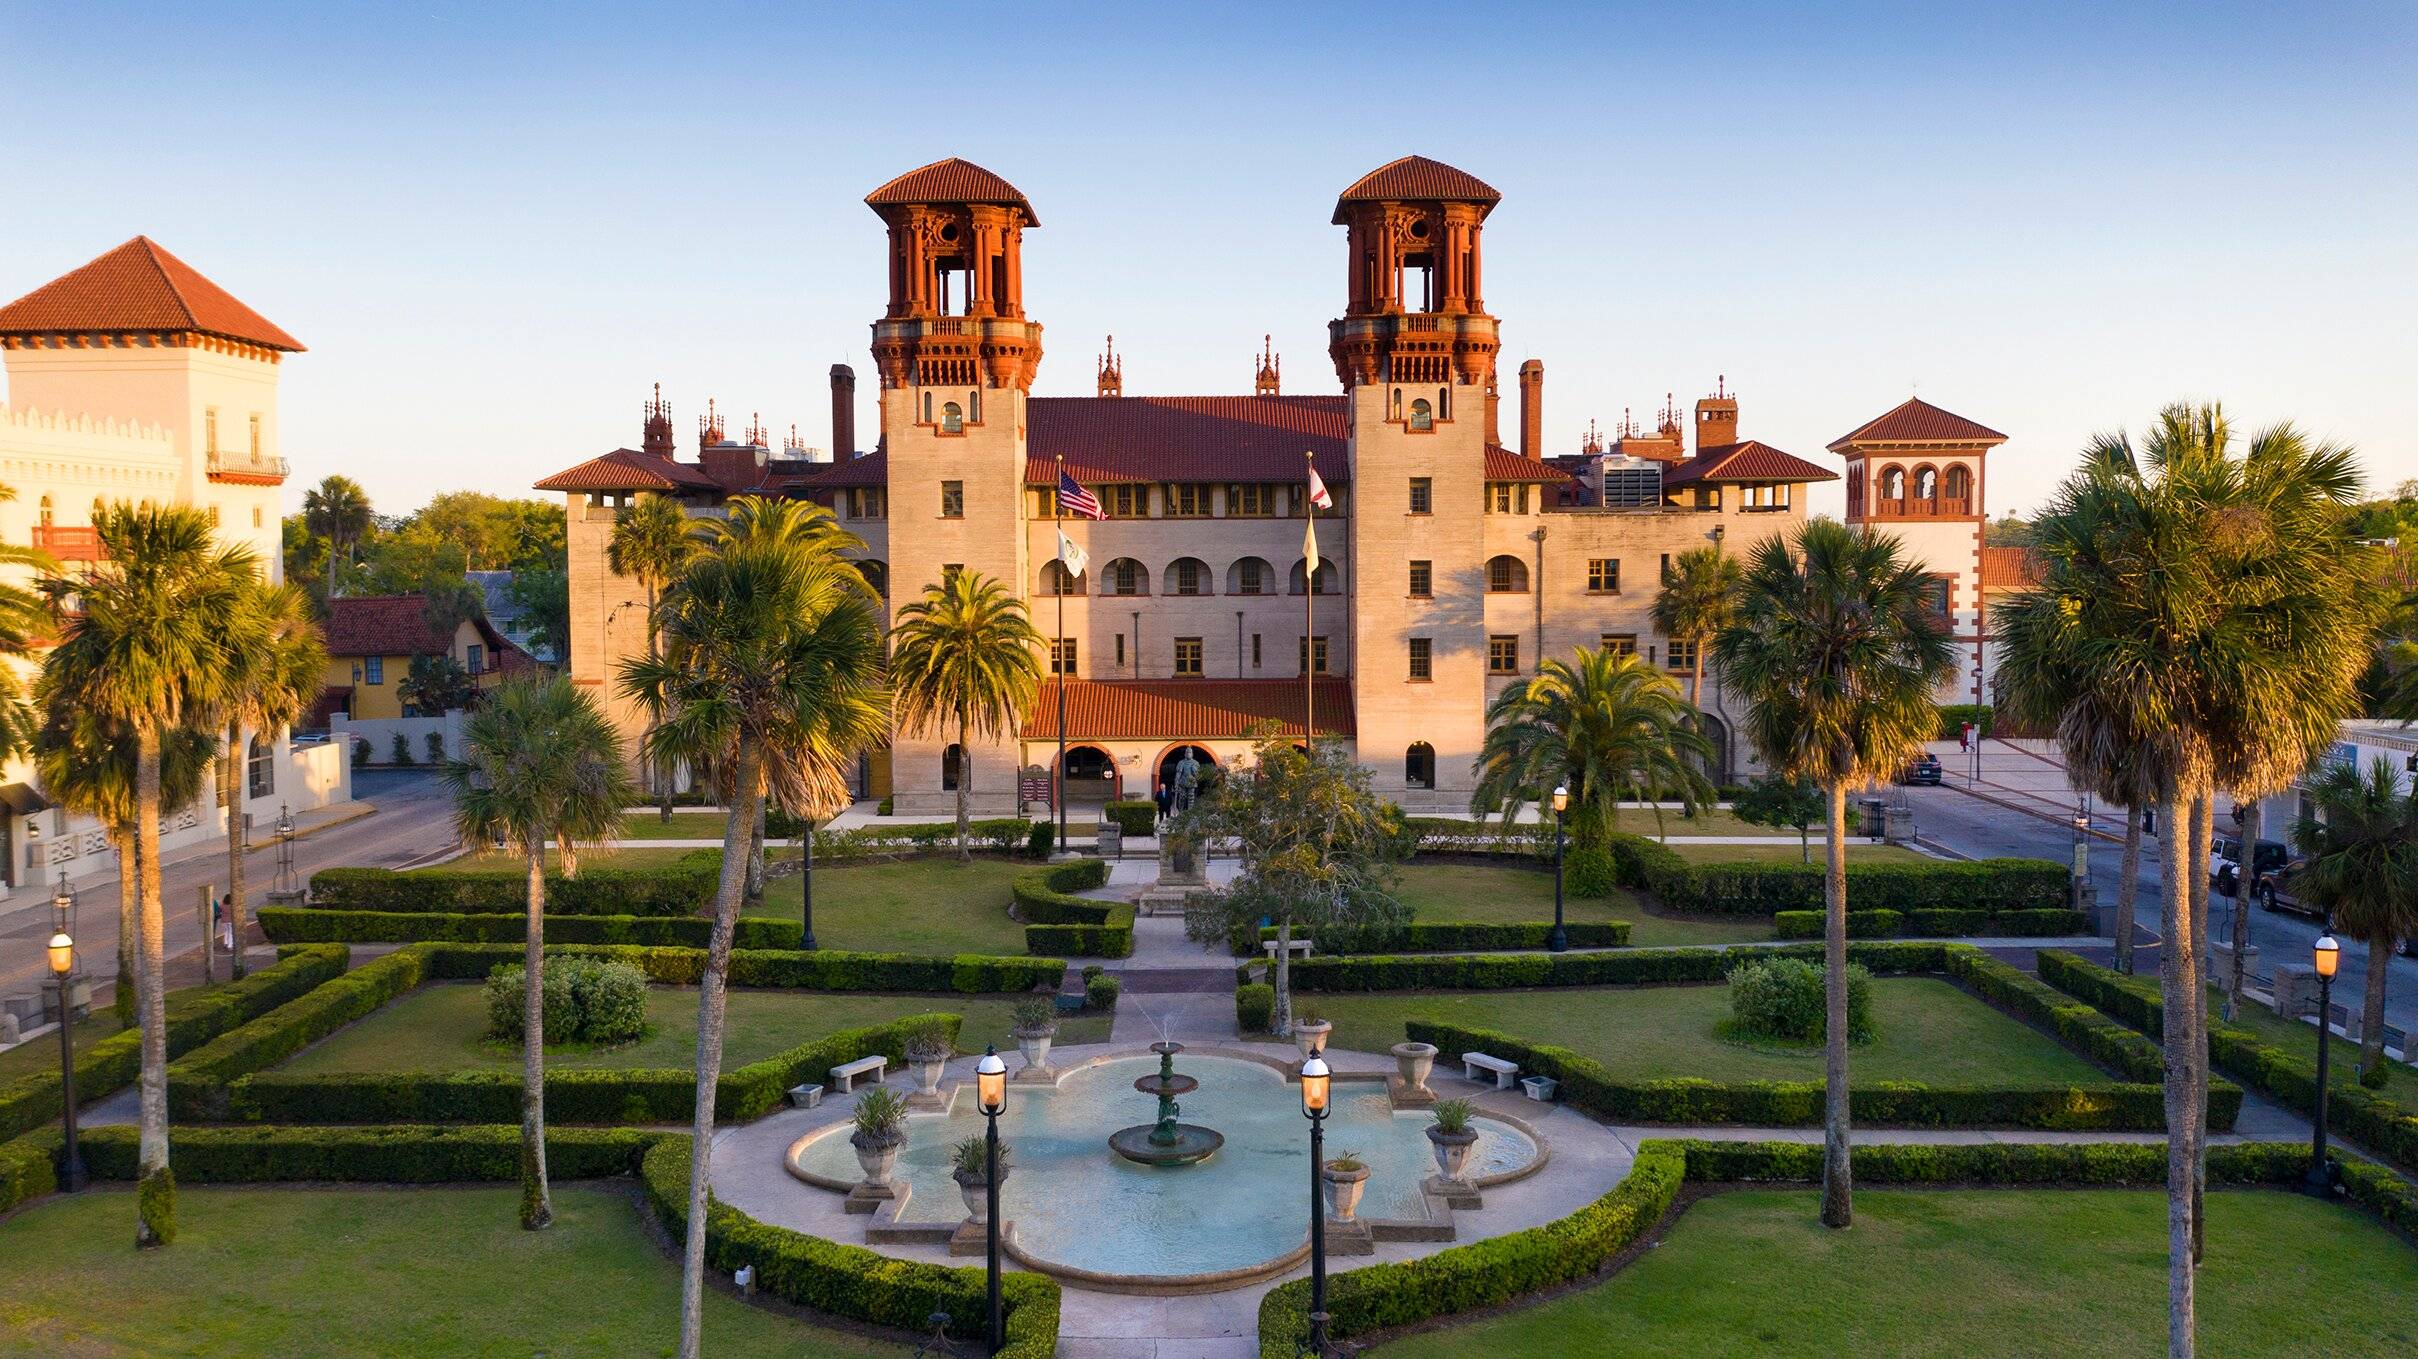 The Lightner Museum: A Glowing Center of Art, Culture, and History in St. Augustine